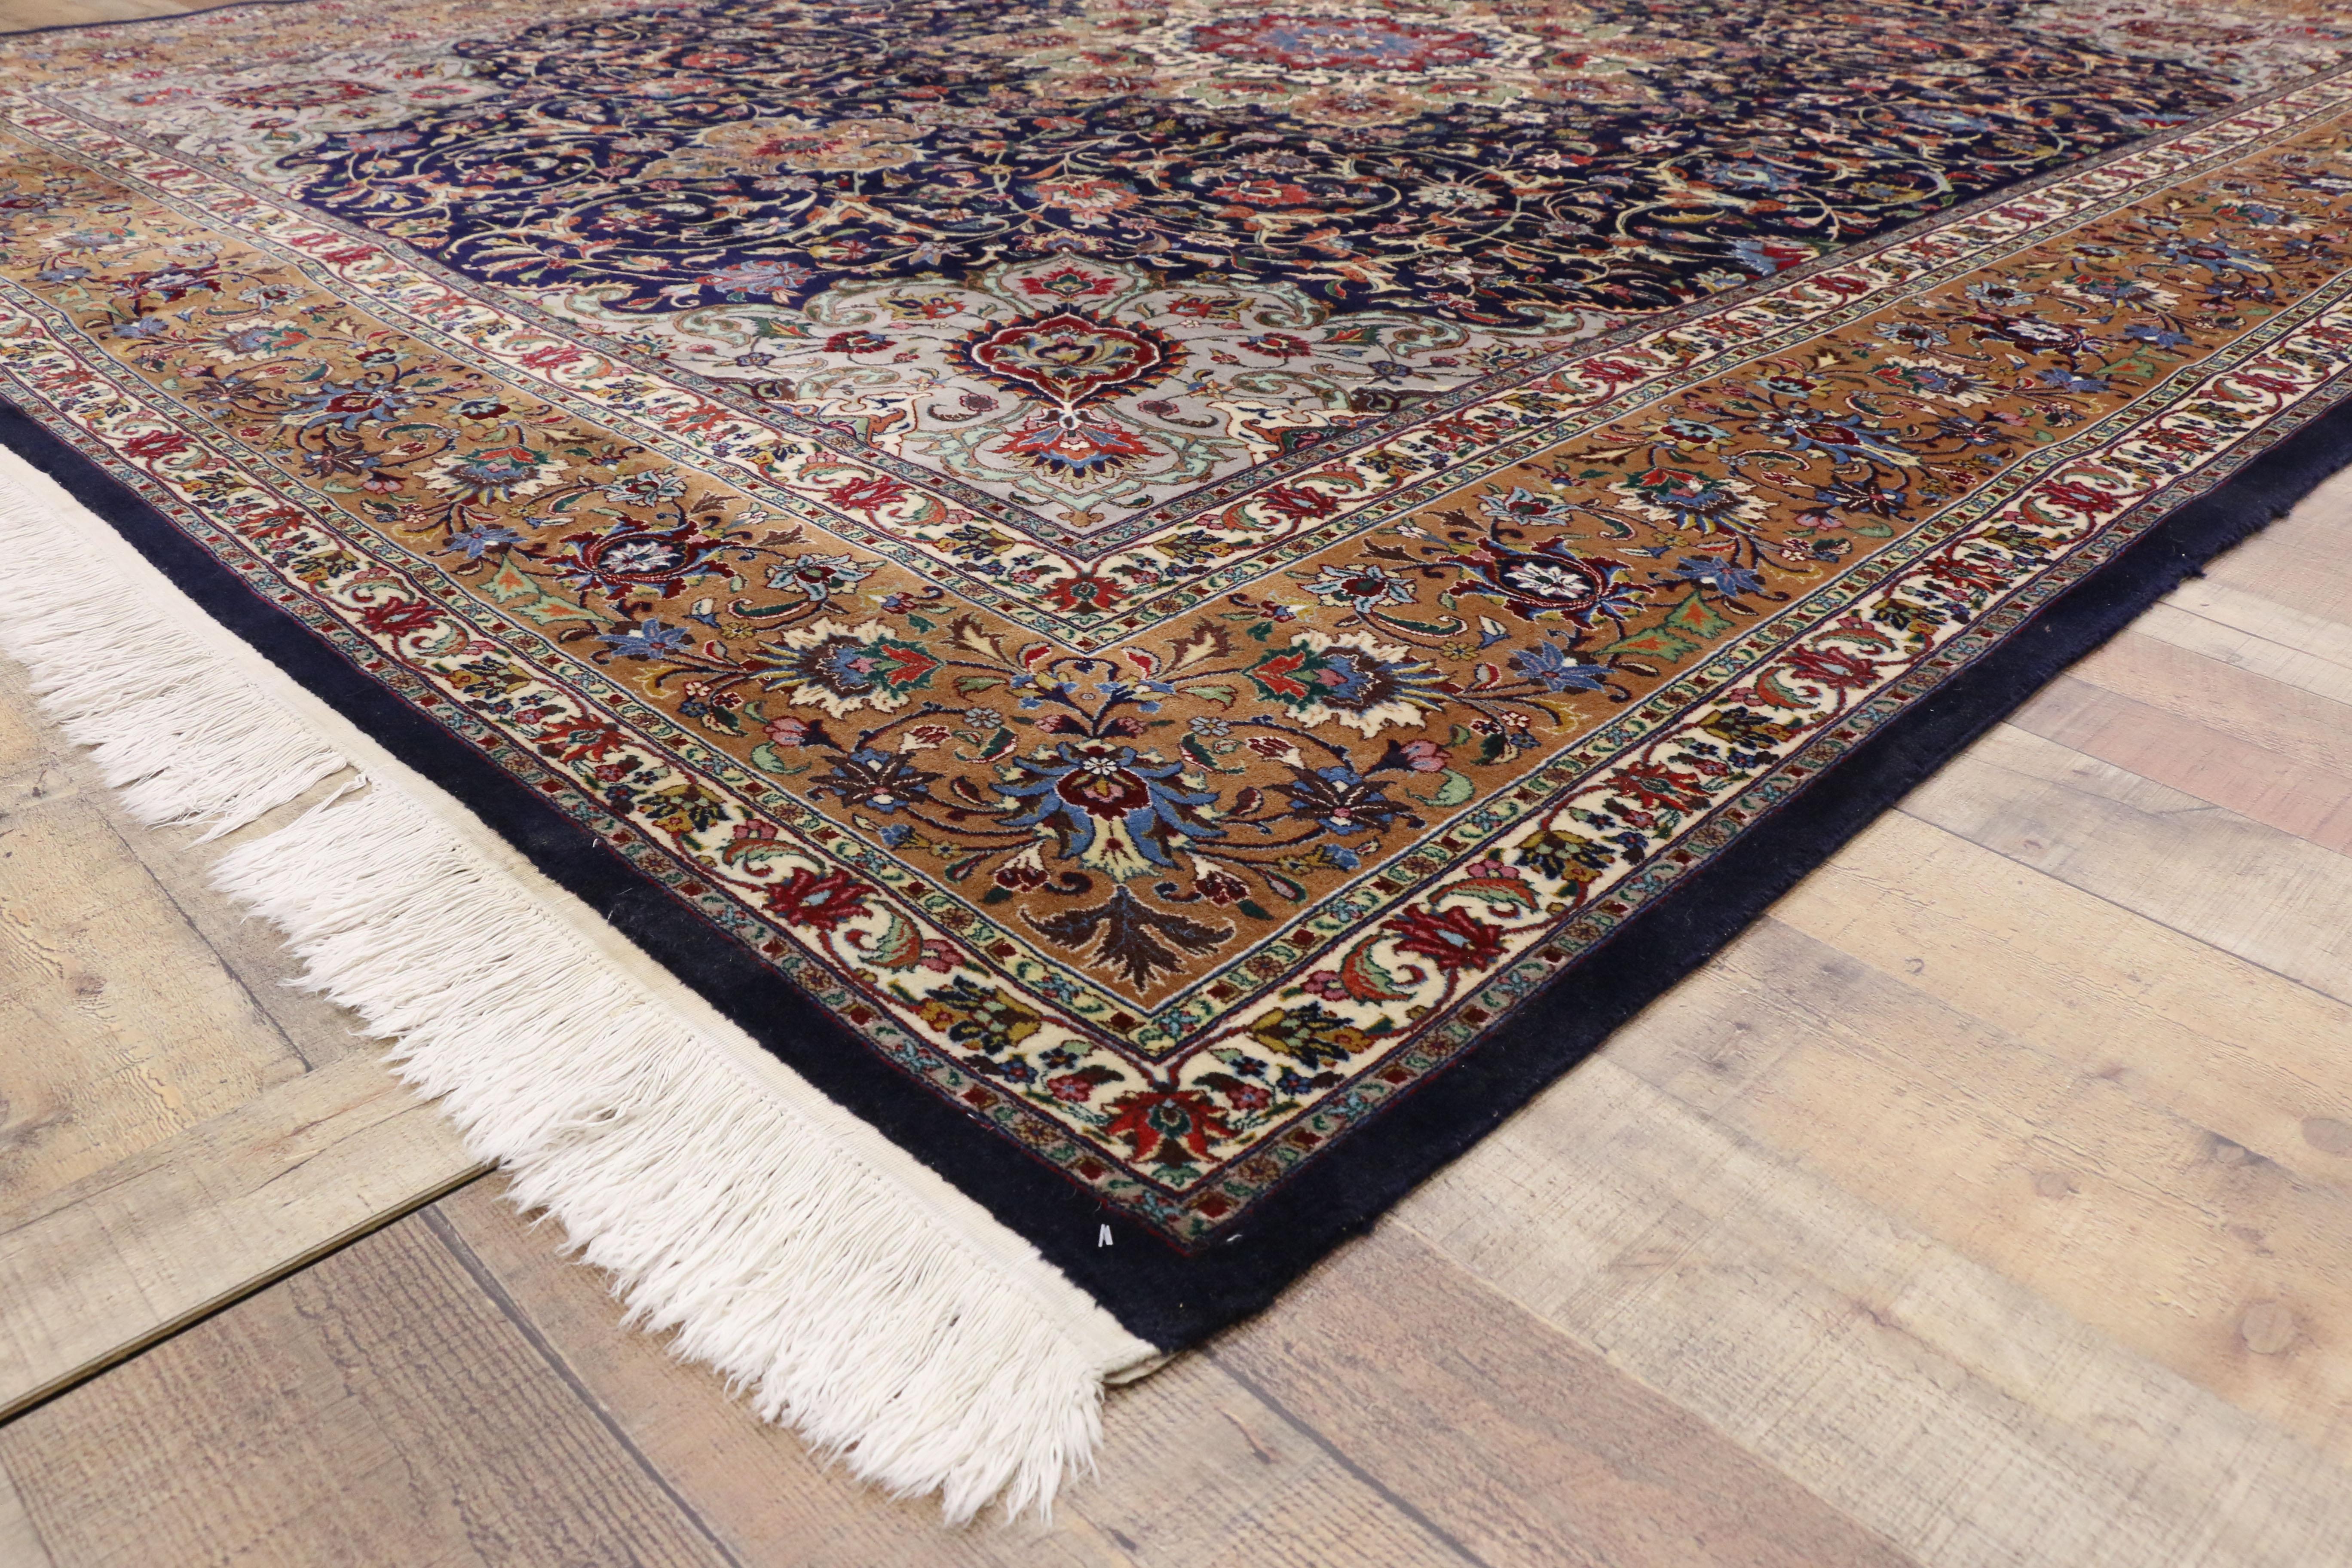 77188, vintage Persian Tabriz rug with French Rococo style. Showcasing decadence and luxury, this hand knotted wool and silk vintage Persian Tabriz rug goes beyond the boundaries of everyday design for an impact that is undeniably sumptuous. Richly